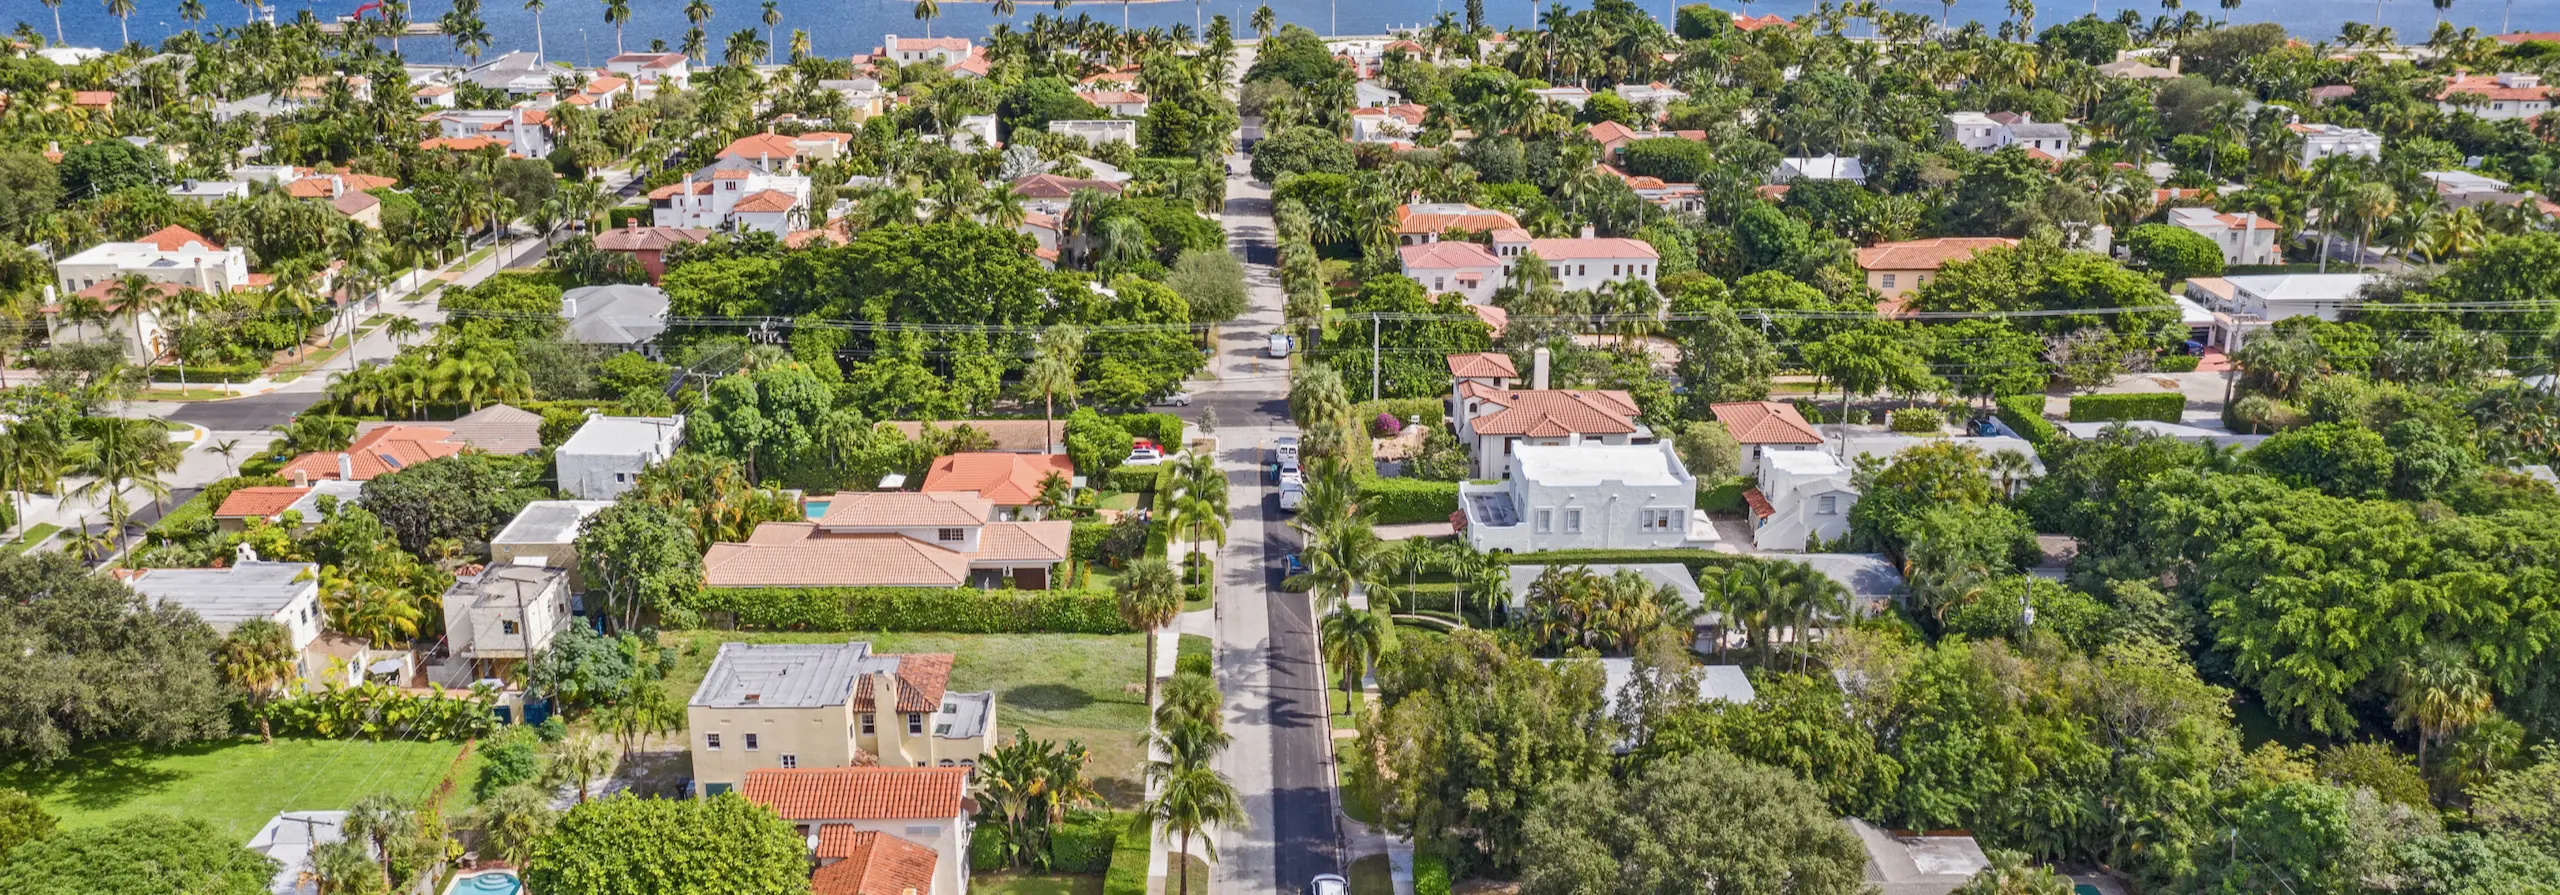 West Palm Beach Homes  | Homes for Sale in West Palm Beach